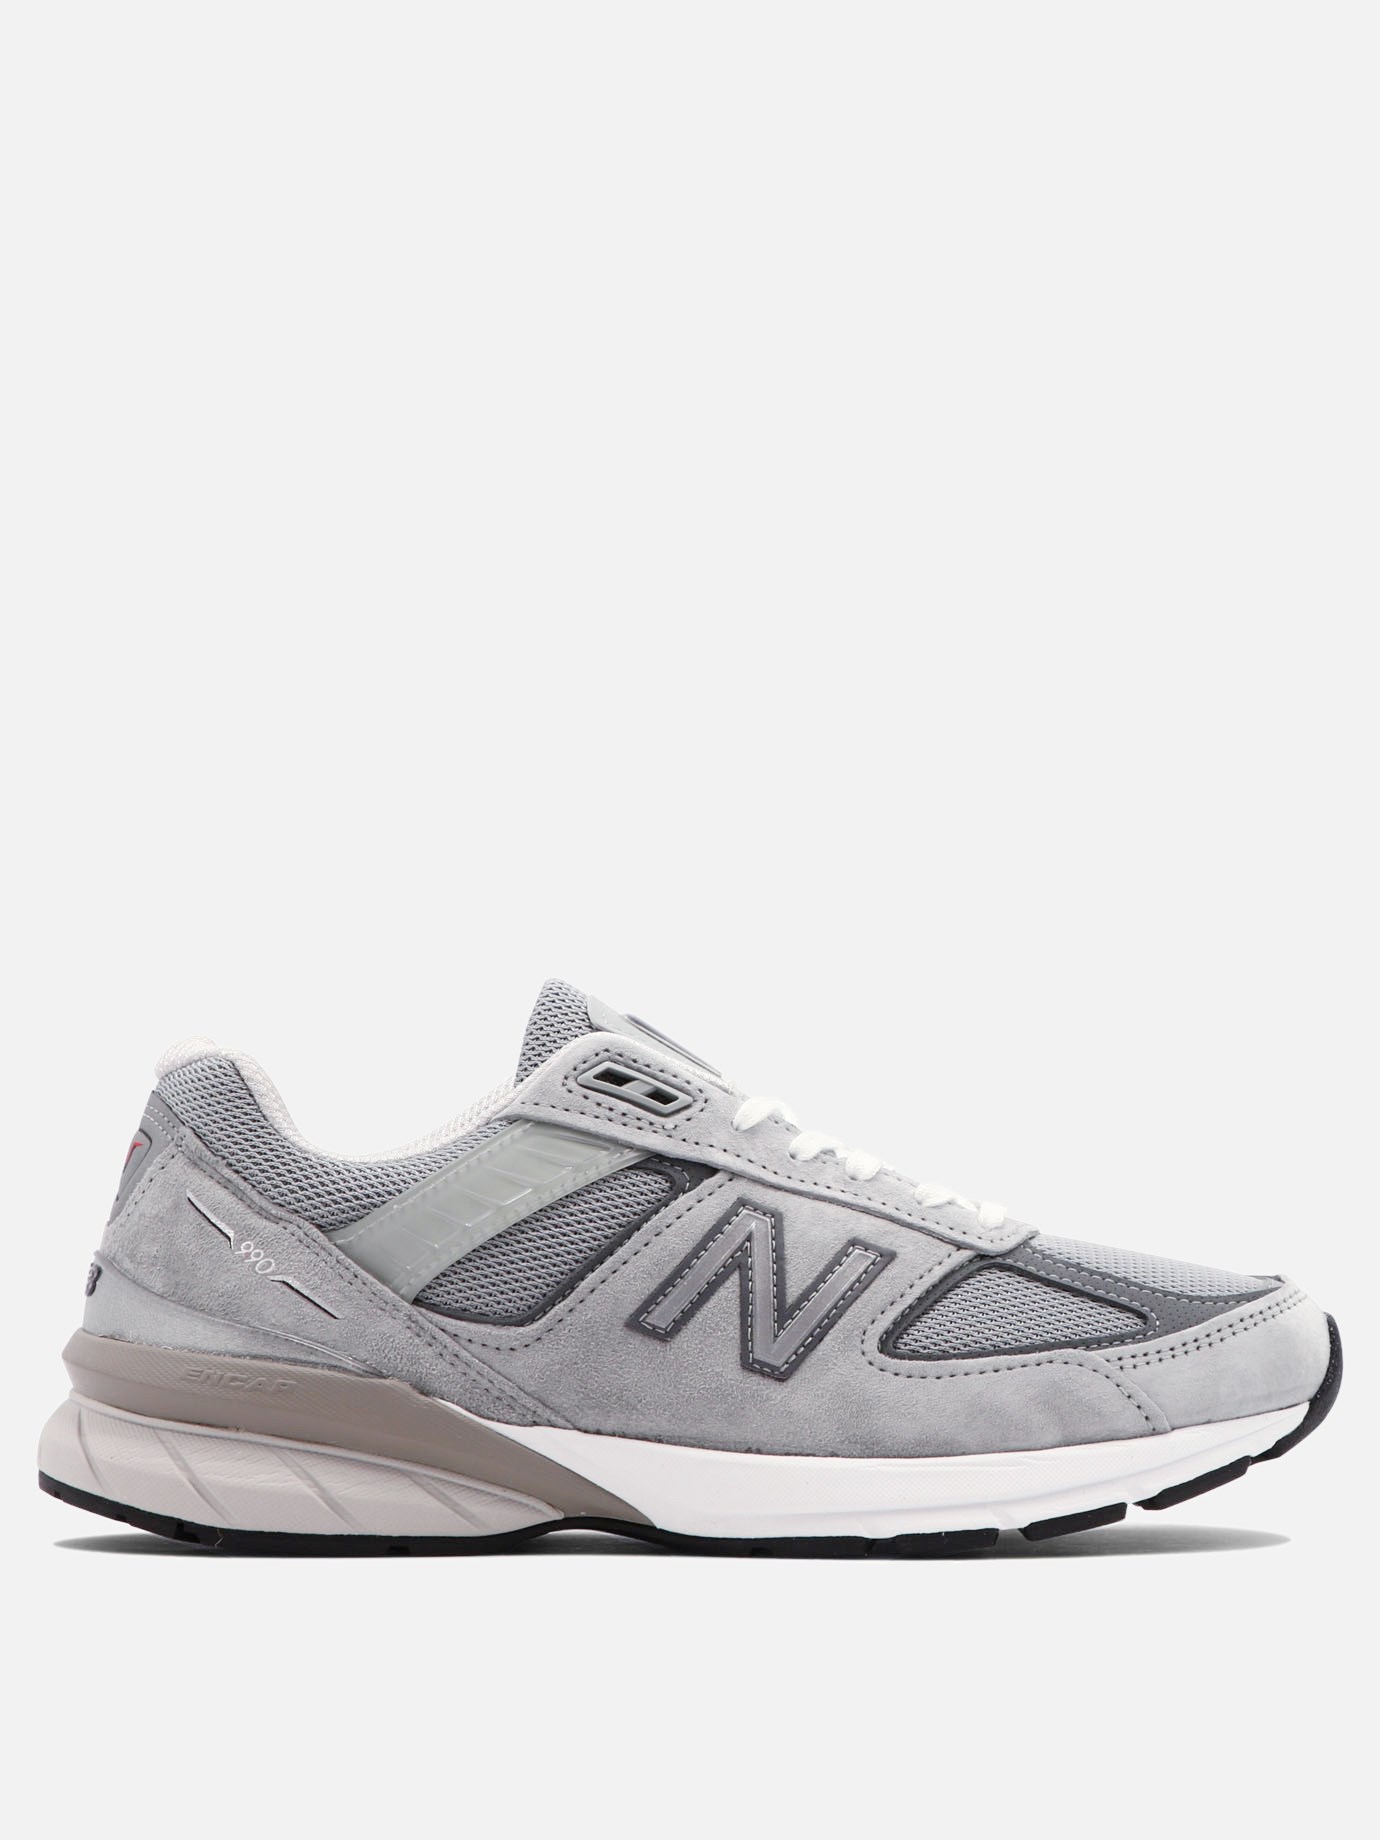  M990  sneakersby New Balance - 2